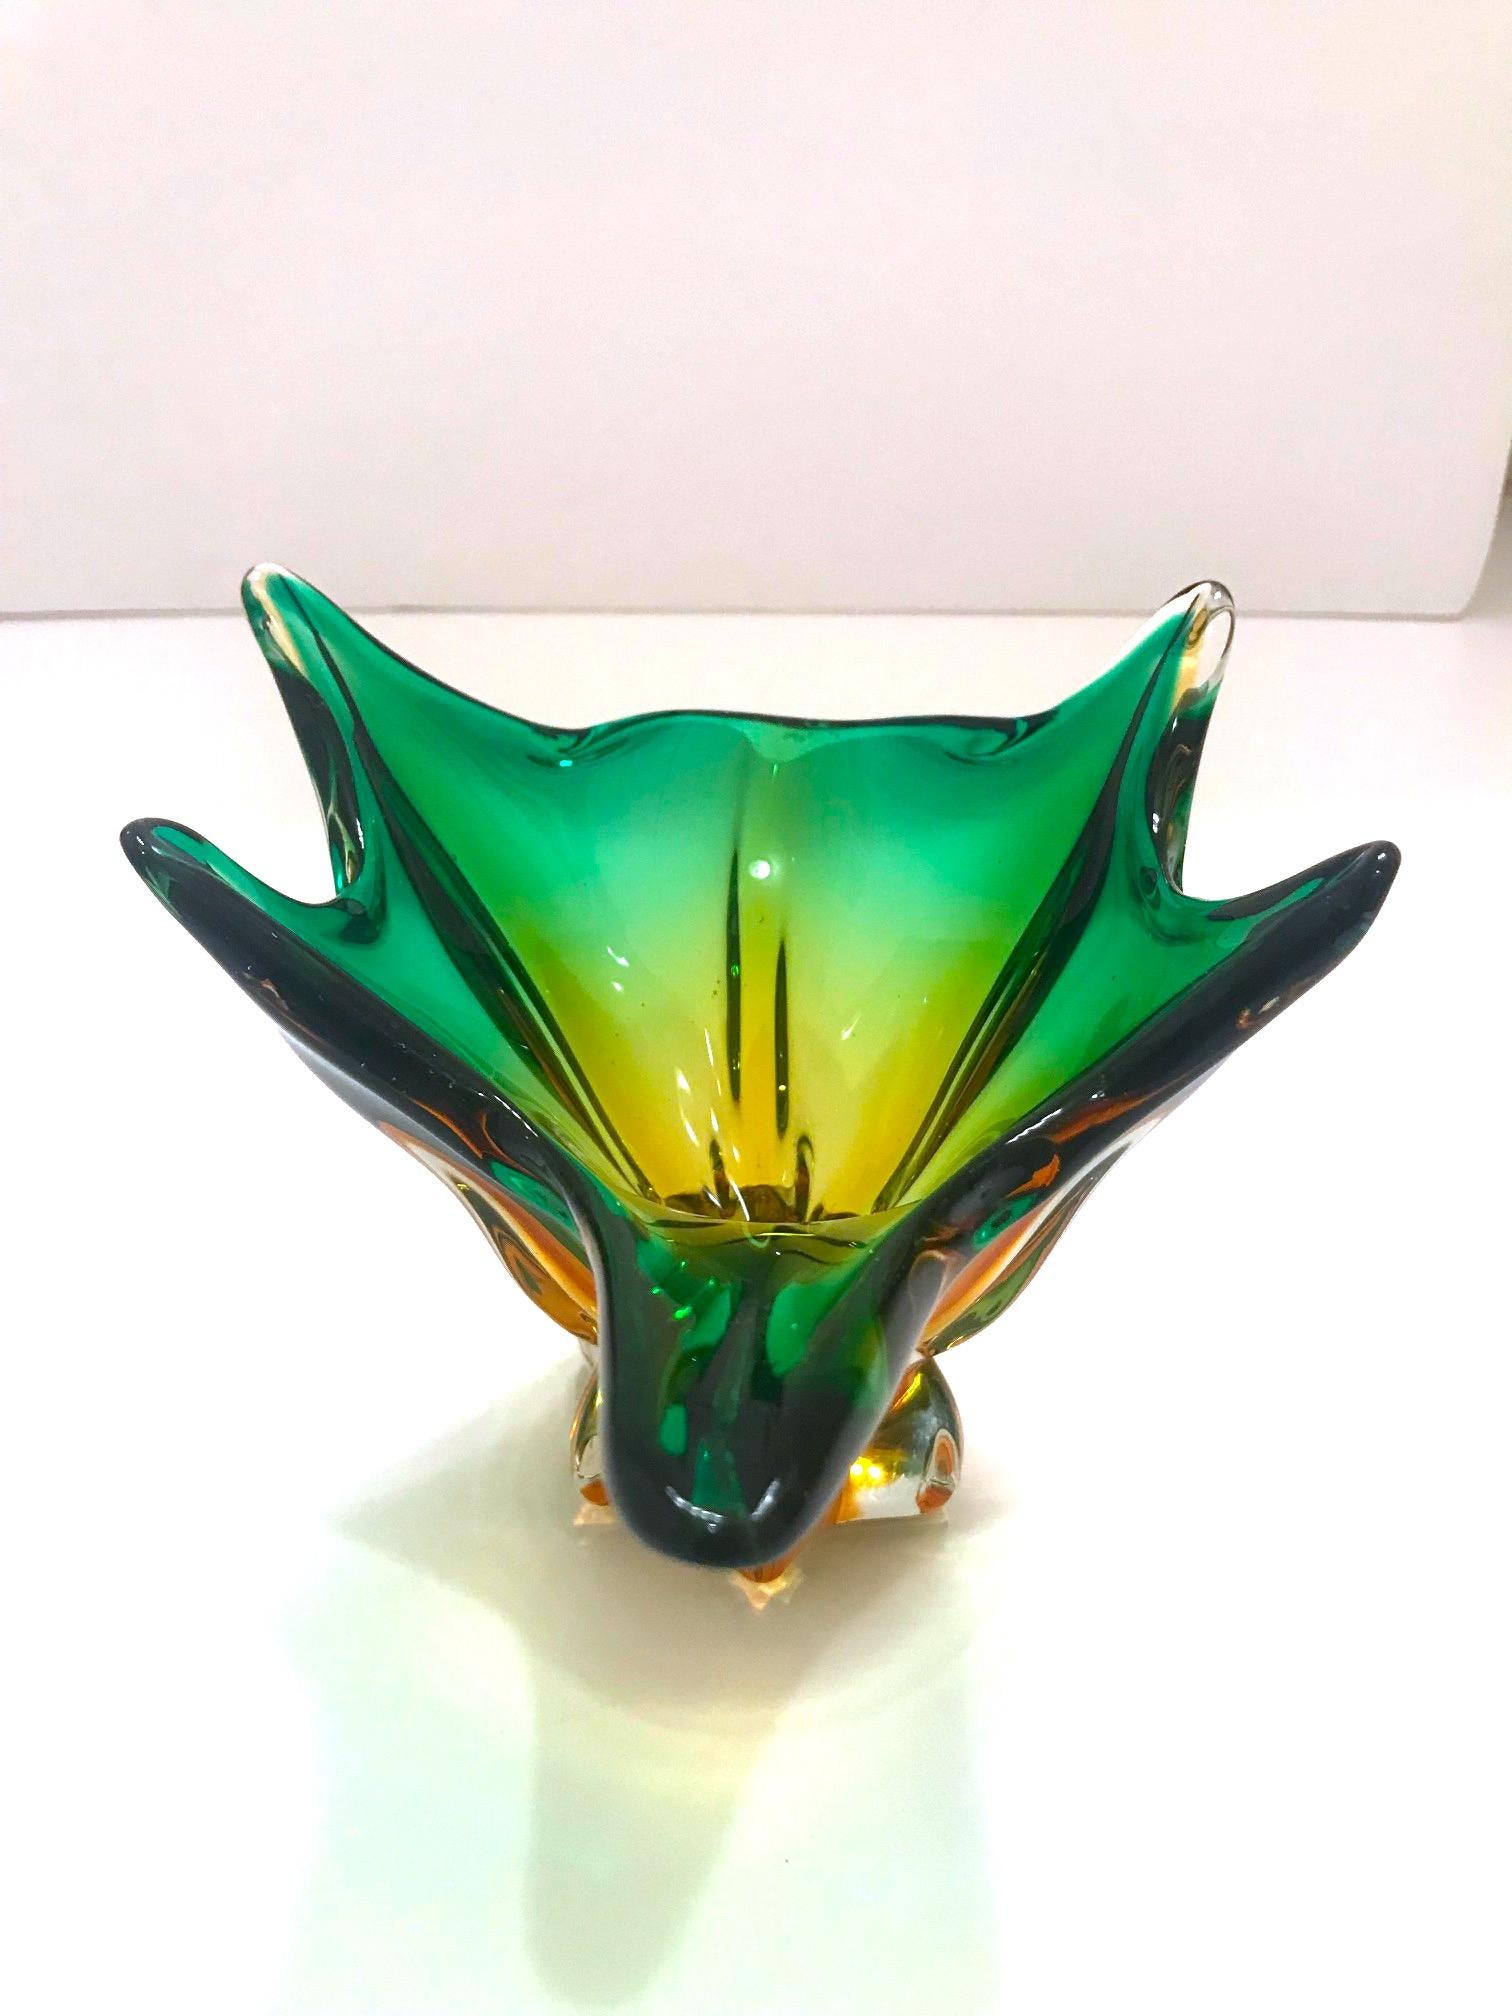 Hand-Crafted 1950s Abstract Murano Sommerso Vase in Emerald and Amber Hues, Italy